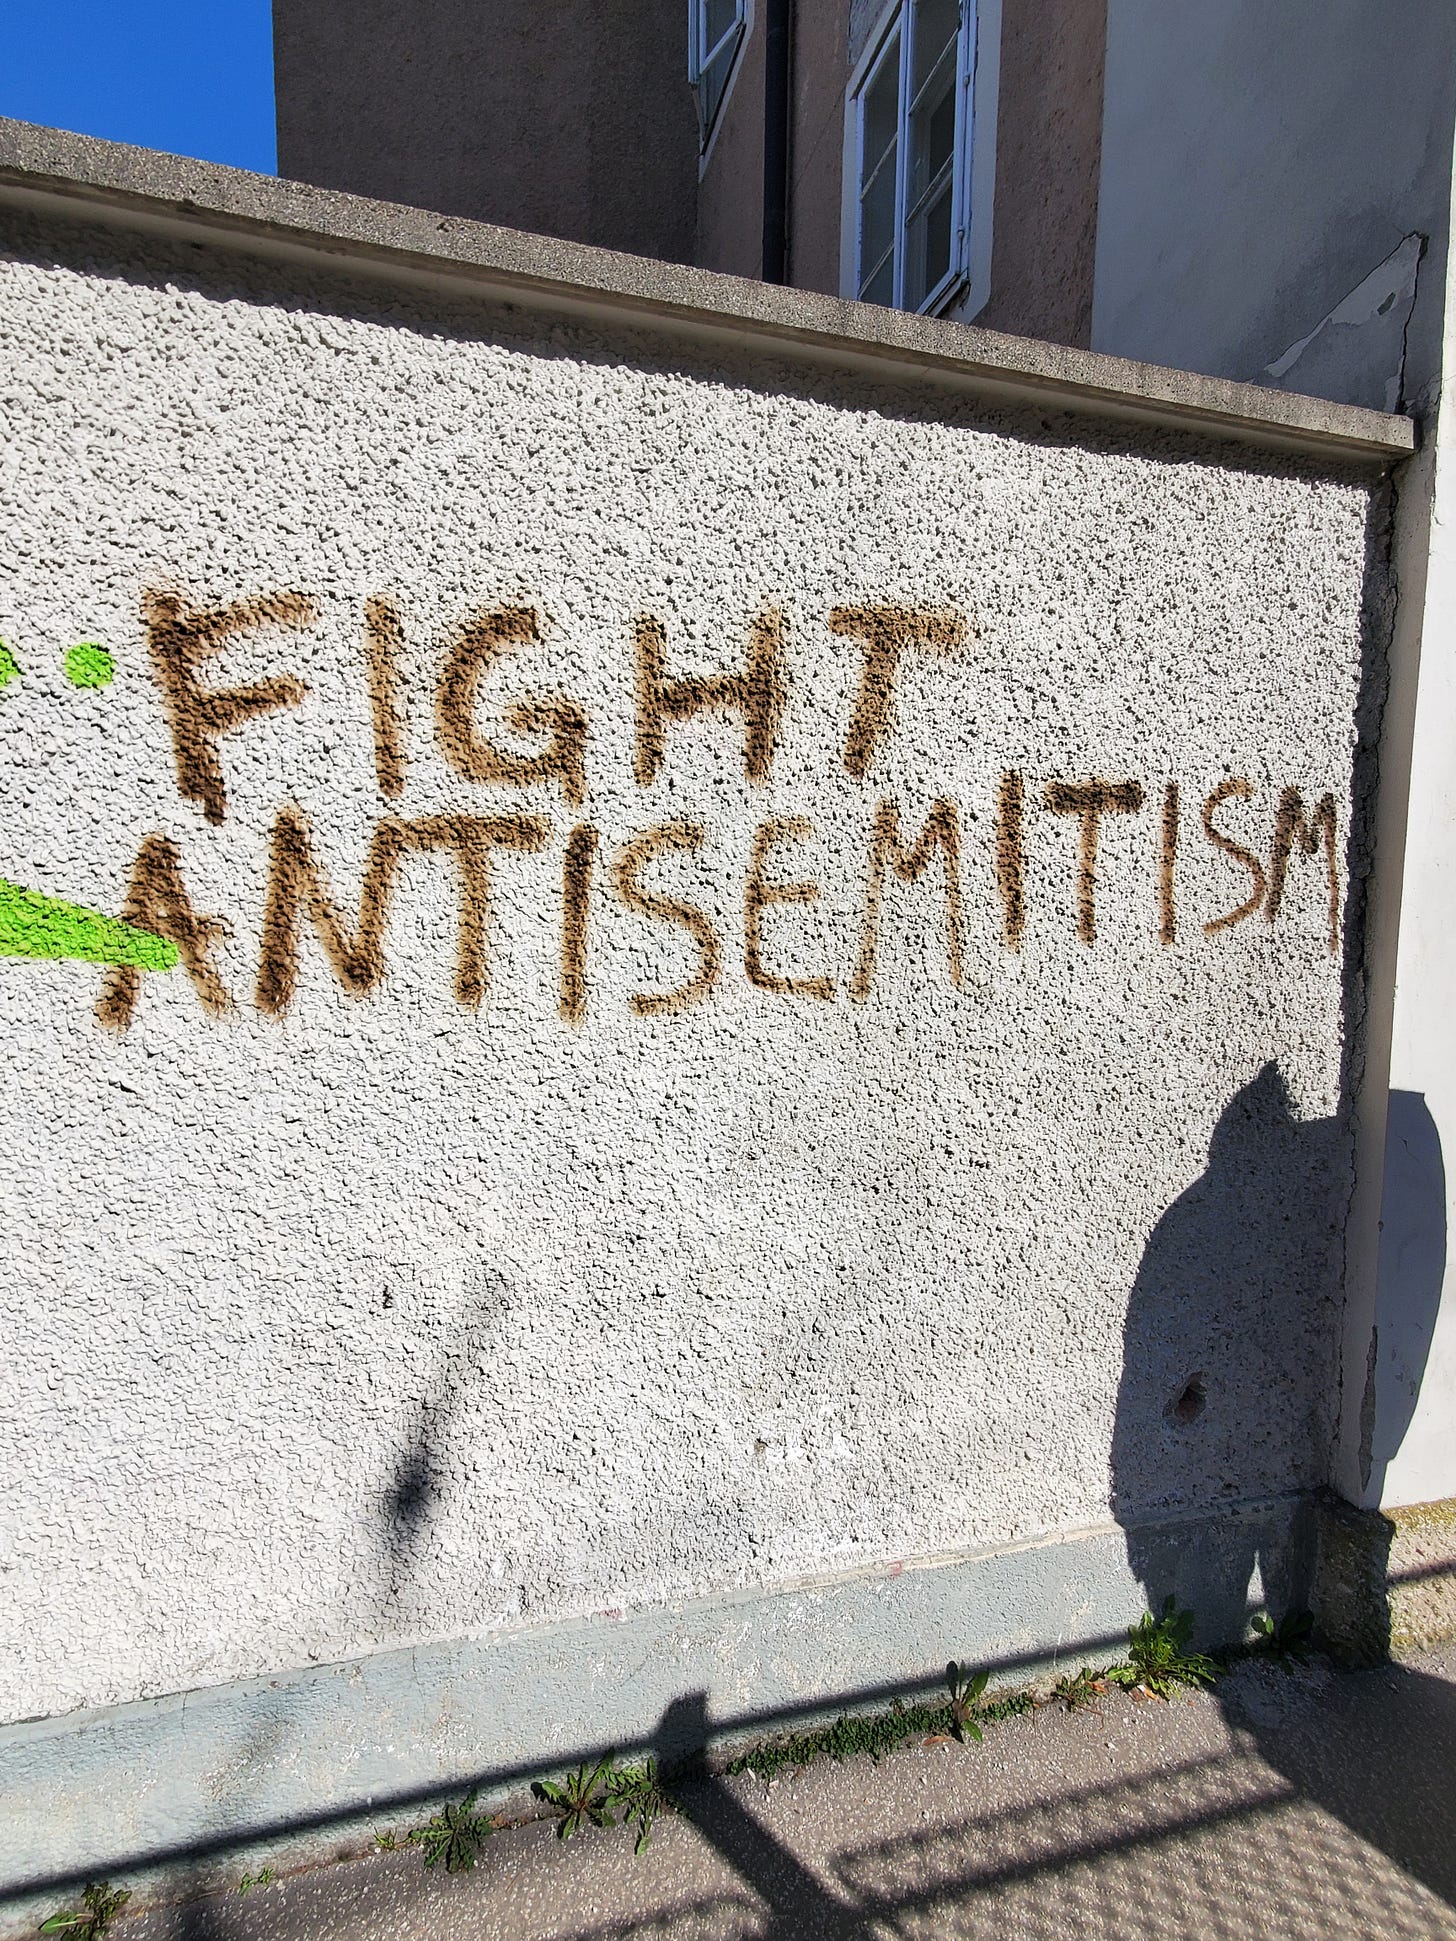 "Fight Antisemitism" in brown spray paint on a gray wall.